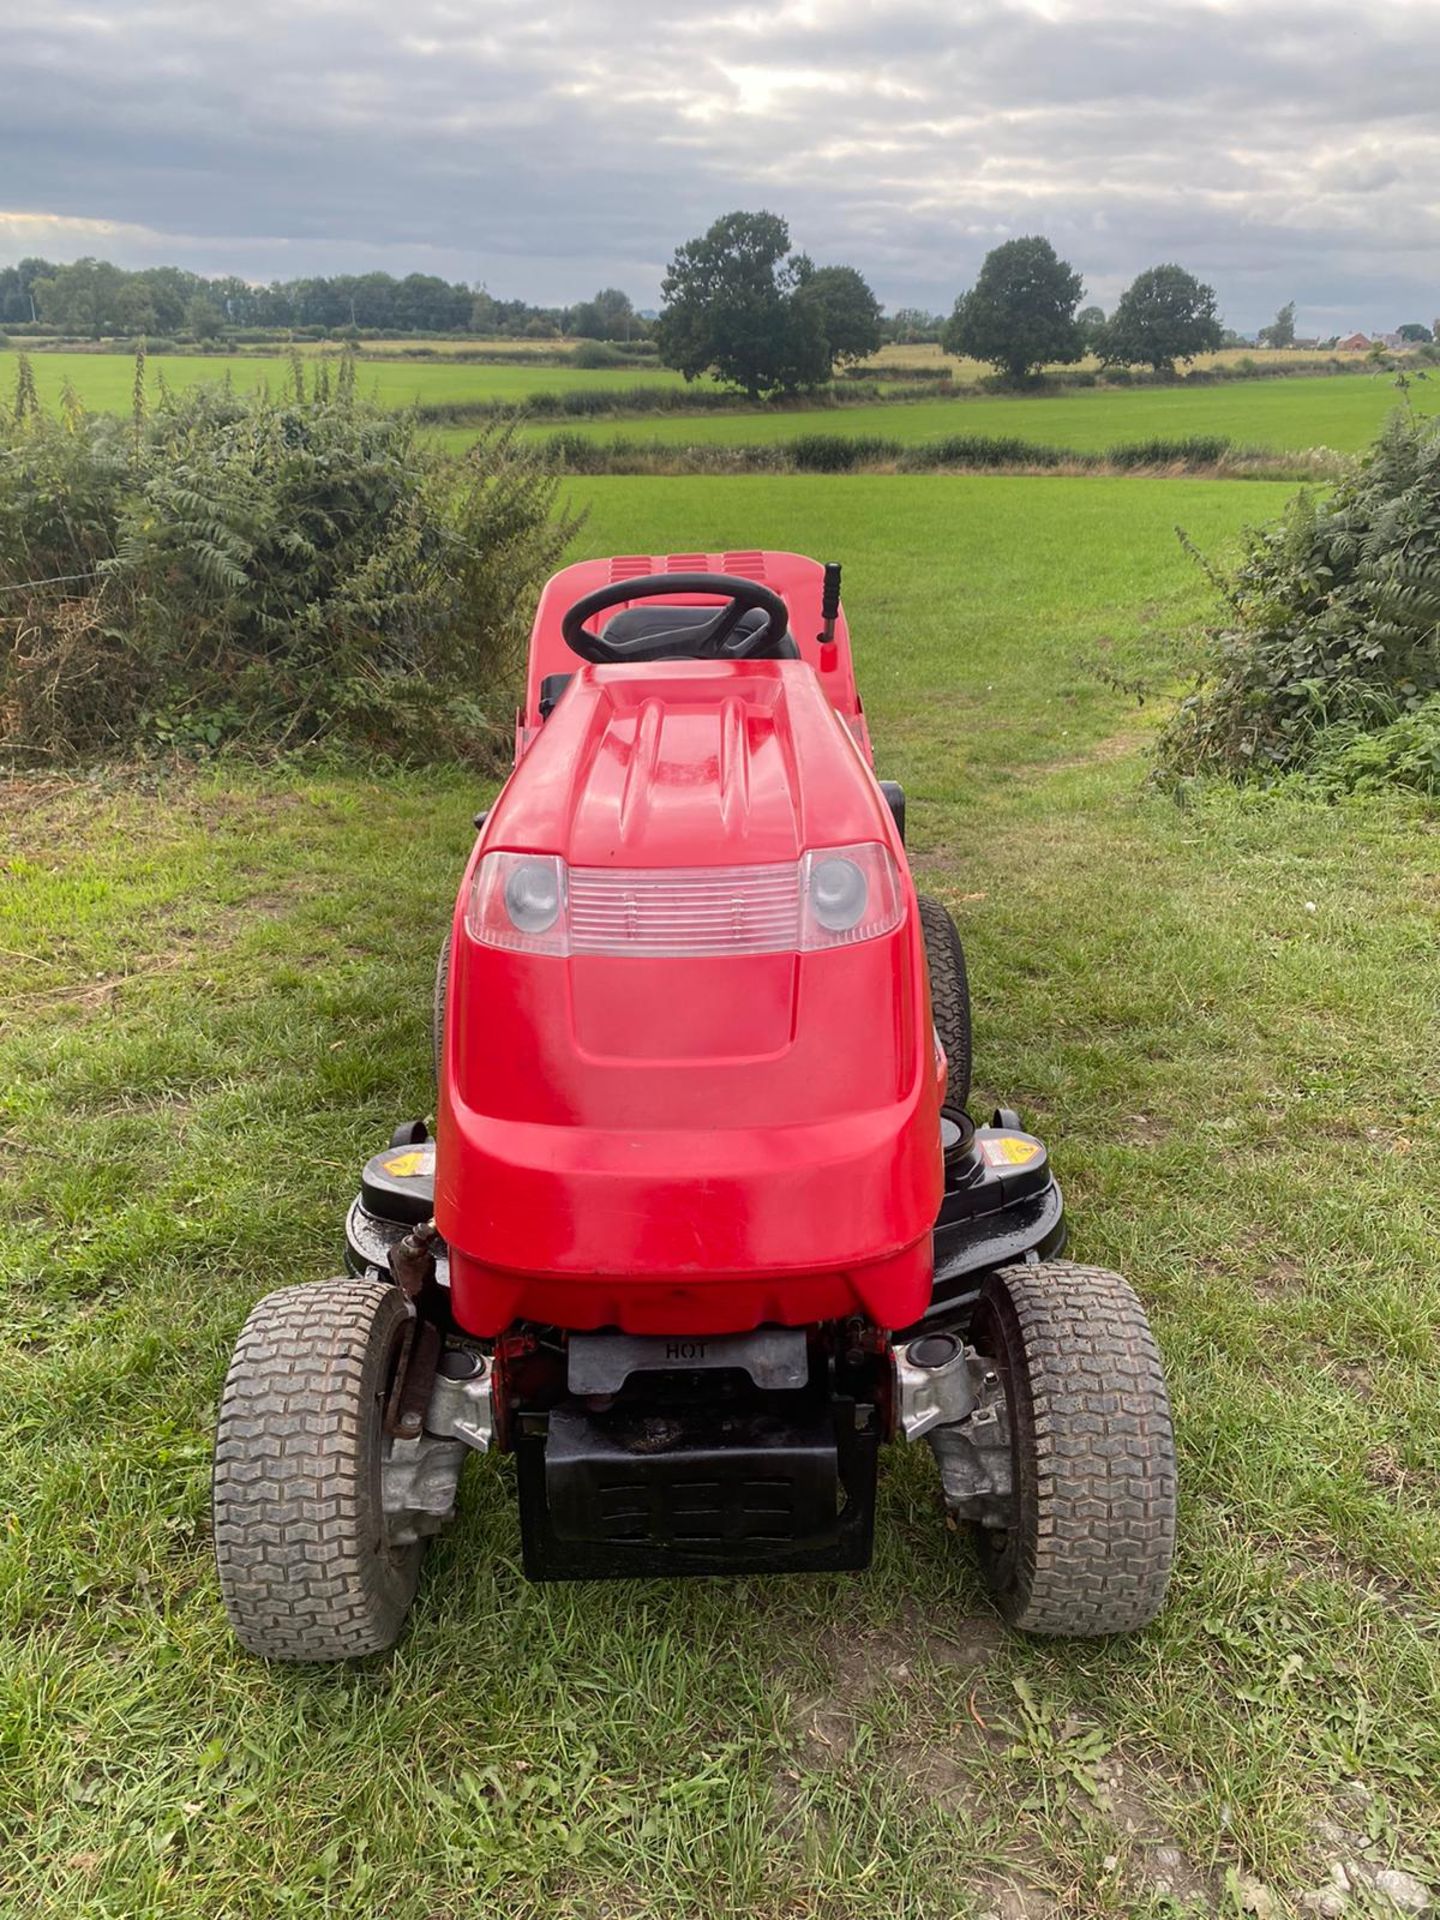 COUNTAX C600H 4 WHEEL DRIVE RIDE ON LAWN MOWER, RUNS DRIVES CUTS AND COLLECTS *NO VAT* - Image 2 of 11